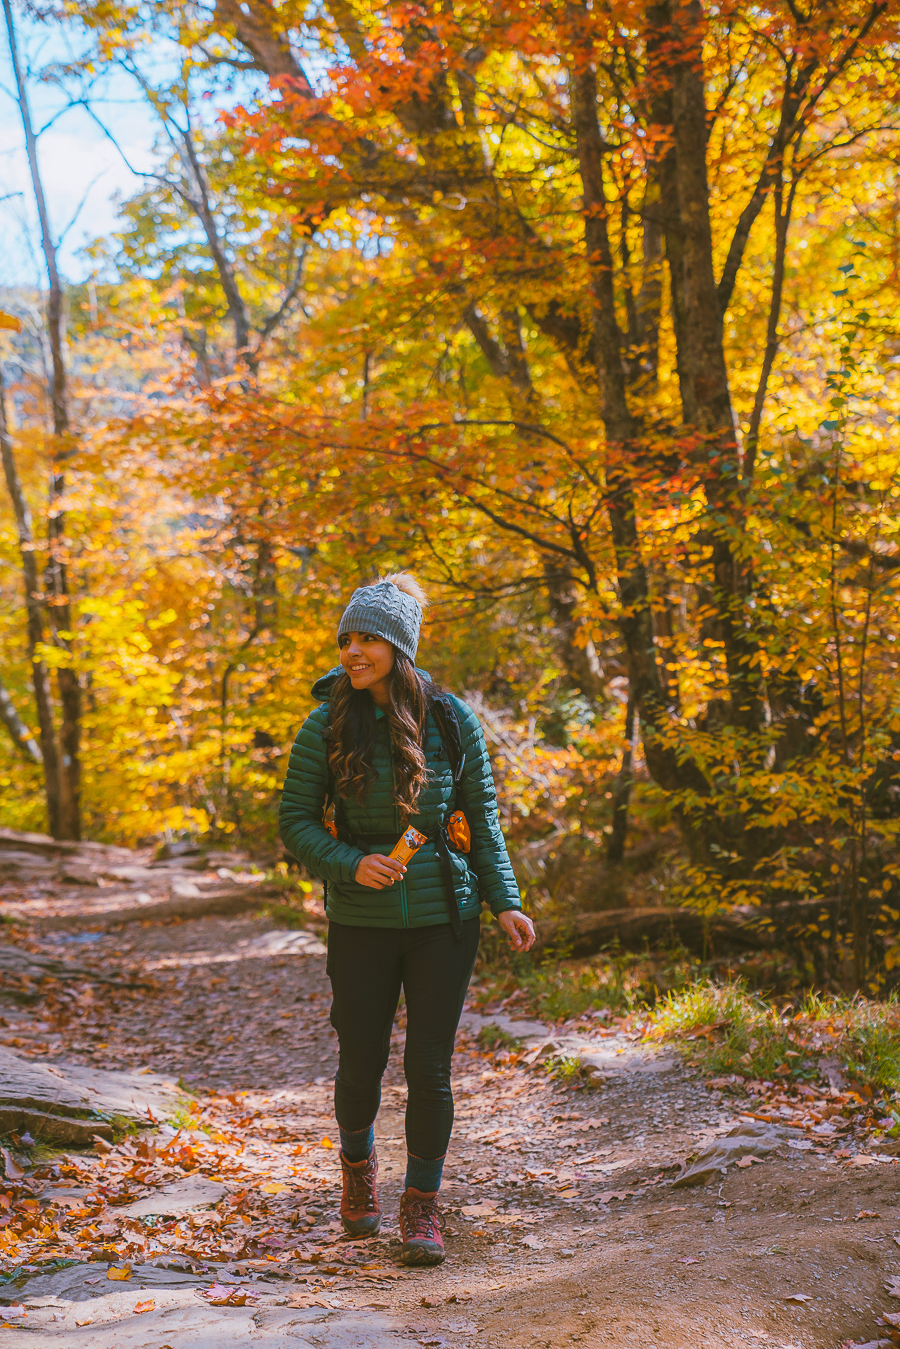 Hiking Clothes: What to Wear Hiking